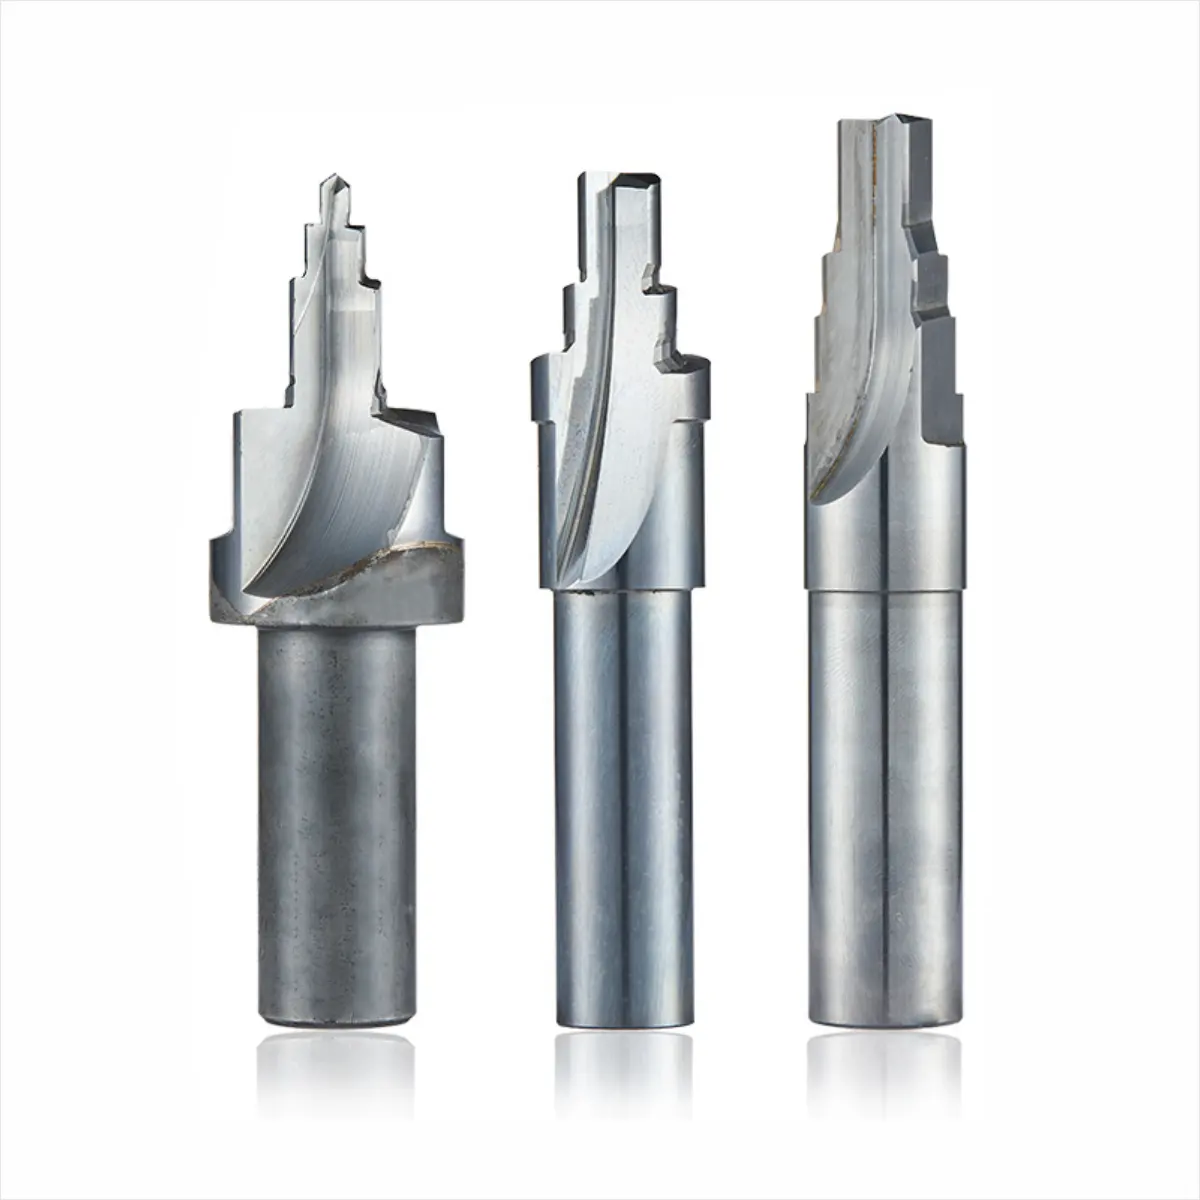 Special tungsten steel Forming Cutter Multi-step Drill Reamer CNC Carbide Reamer Step Drill Reamer for Harden Steel processing